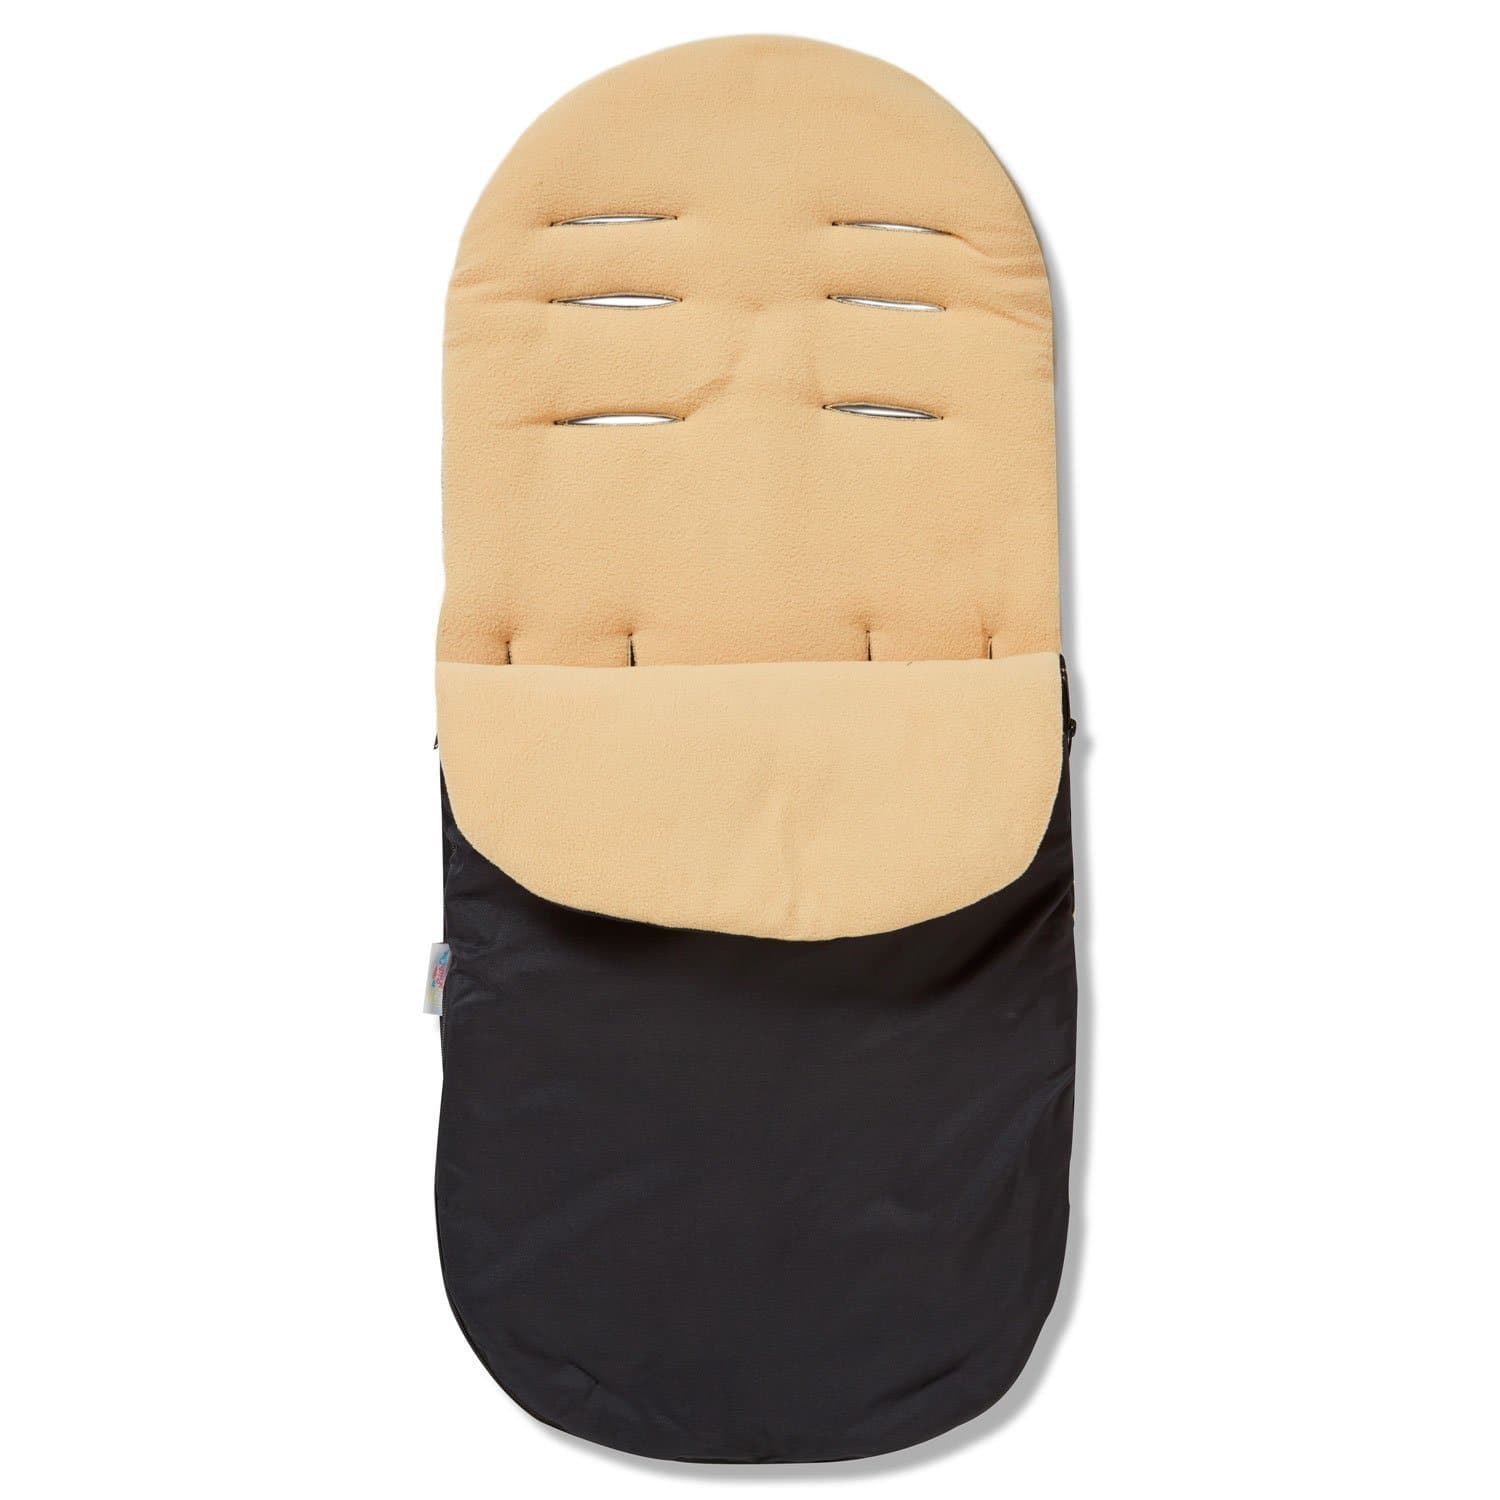 Footmuff / Cosy Toes Compatible with Joolz - Sand / Fits All Models | For Your Little One